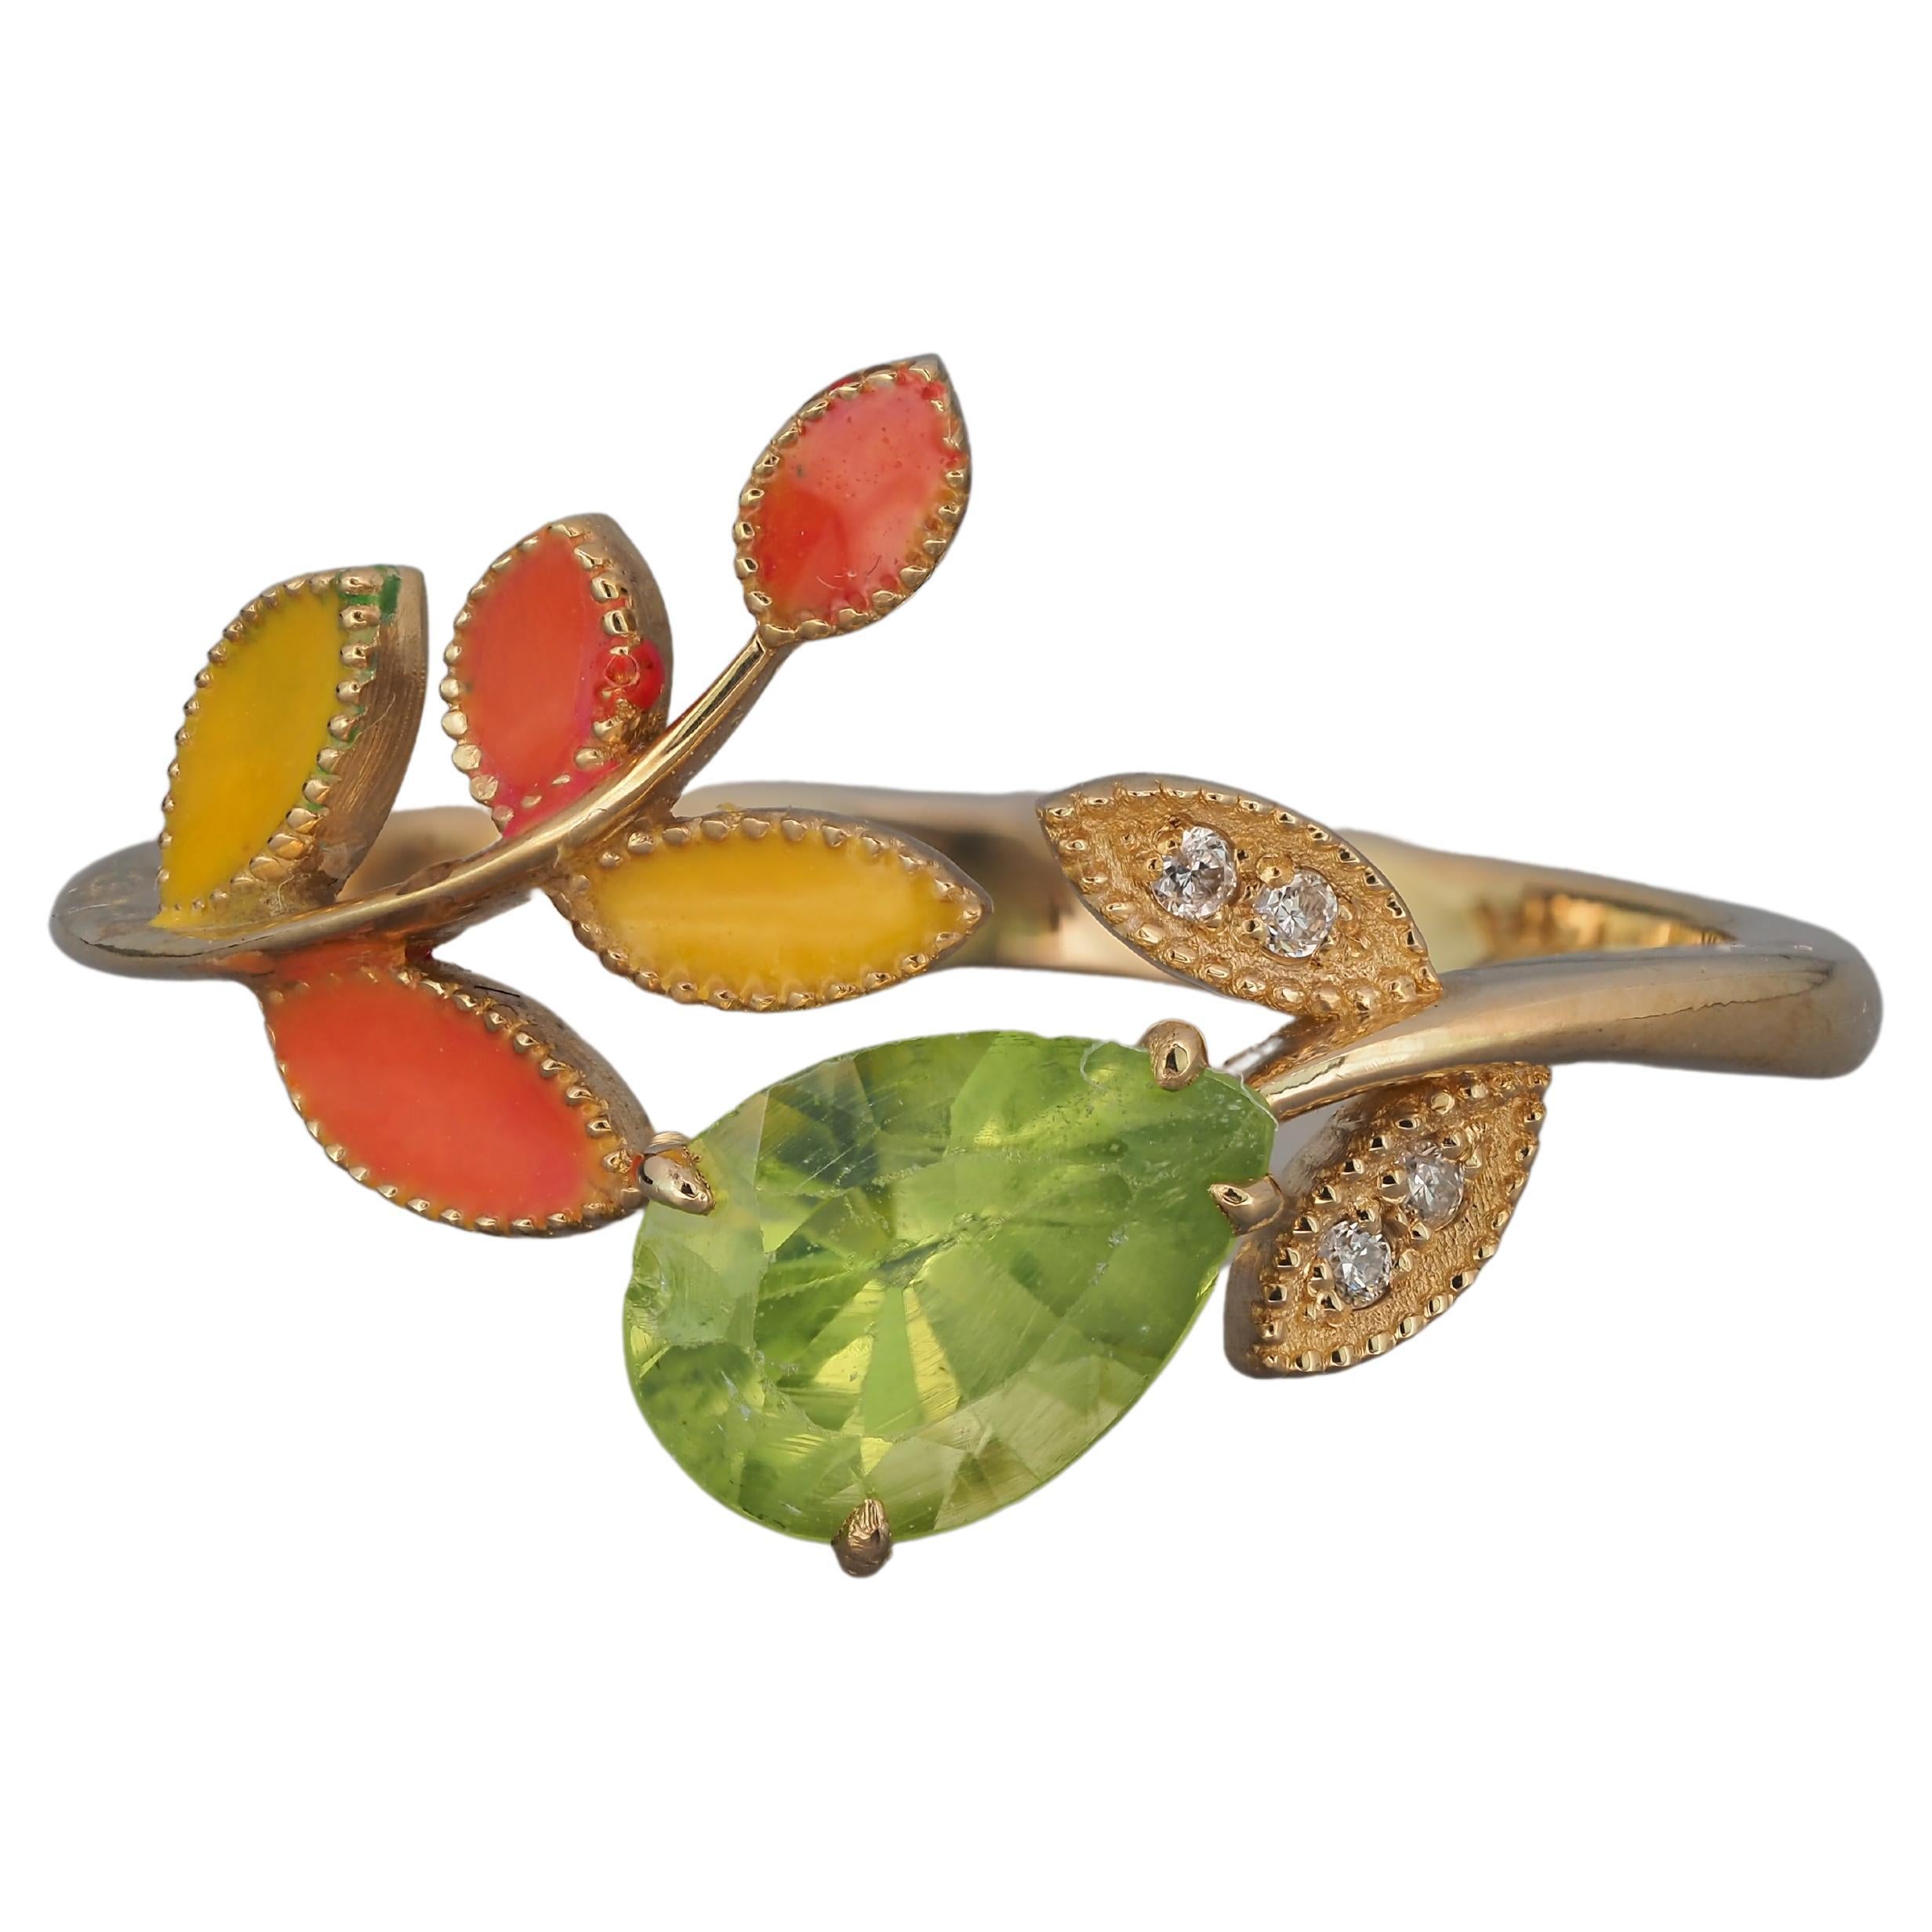 For Sale:  14k Gold Ring with Enamel Autumn Color Leaves with Peridot, Diamonds